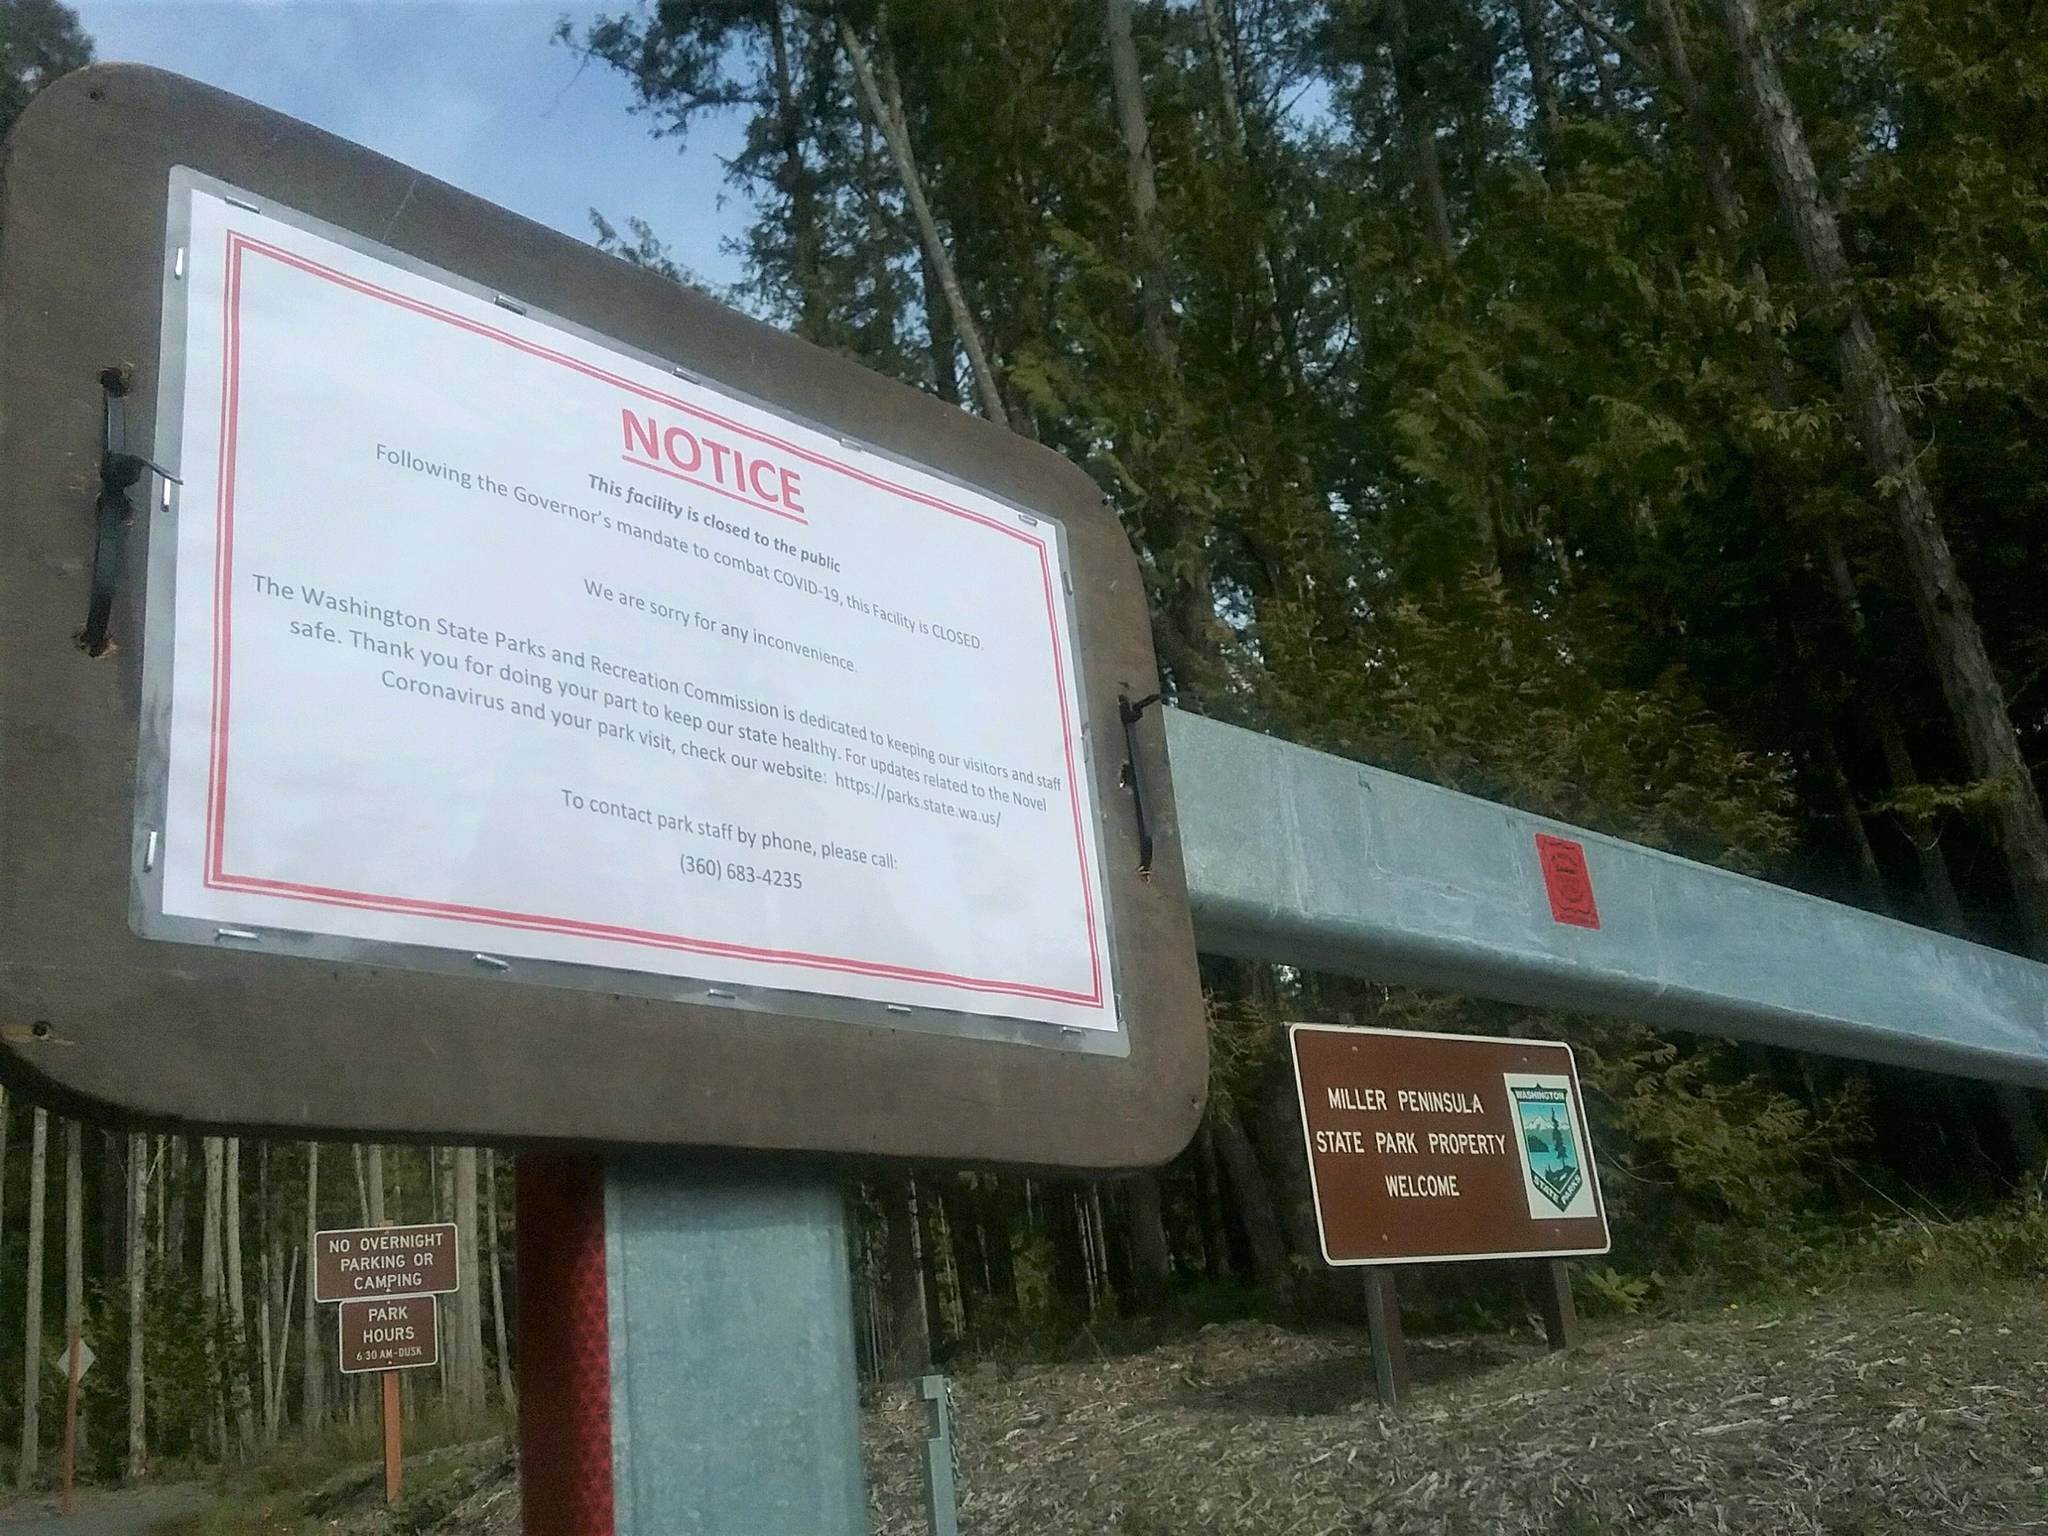 City, county and state parks across the Olympic Peninsula, including Miller Peninsula State Park, have been closed to help stem the spread of the novel coronavirus. Sequim Gazette photo by Michael Dashiell